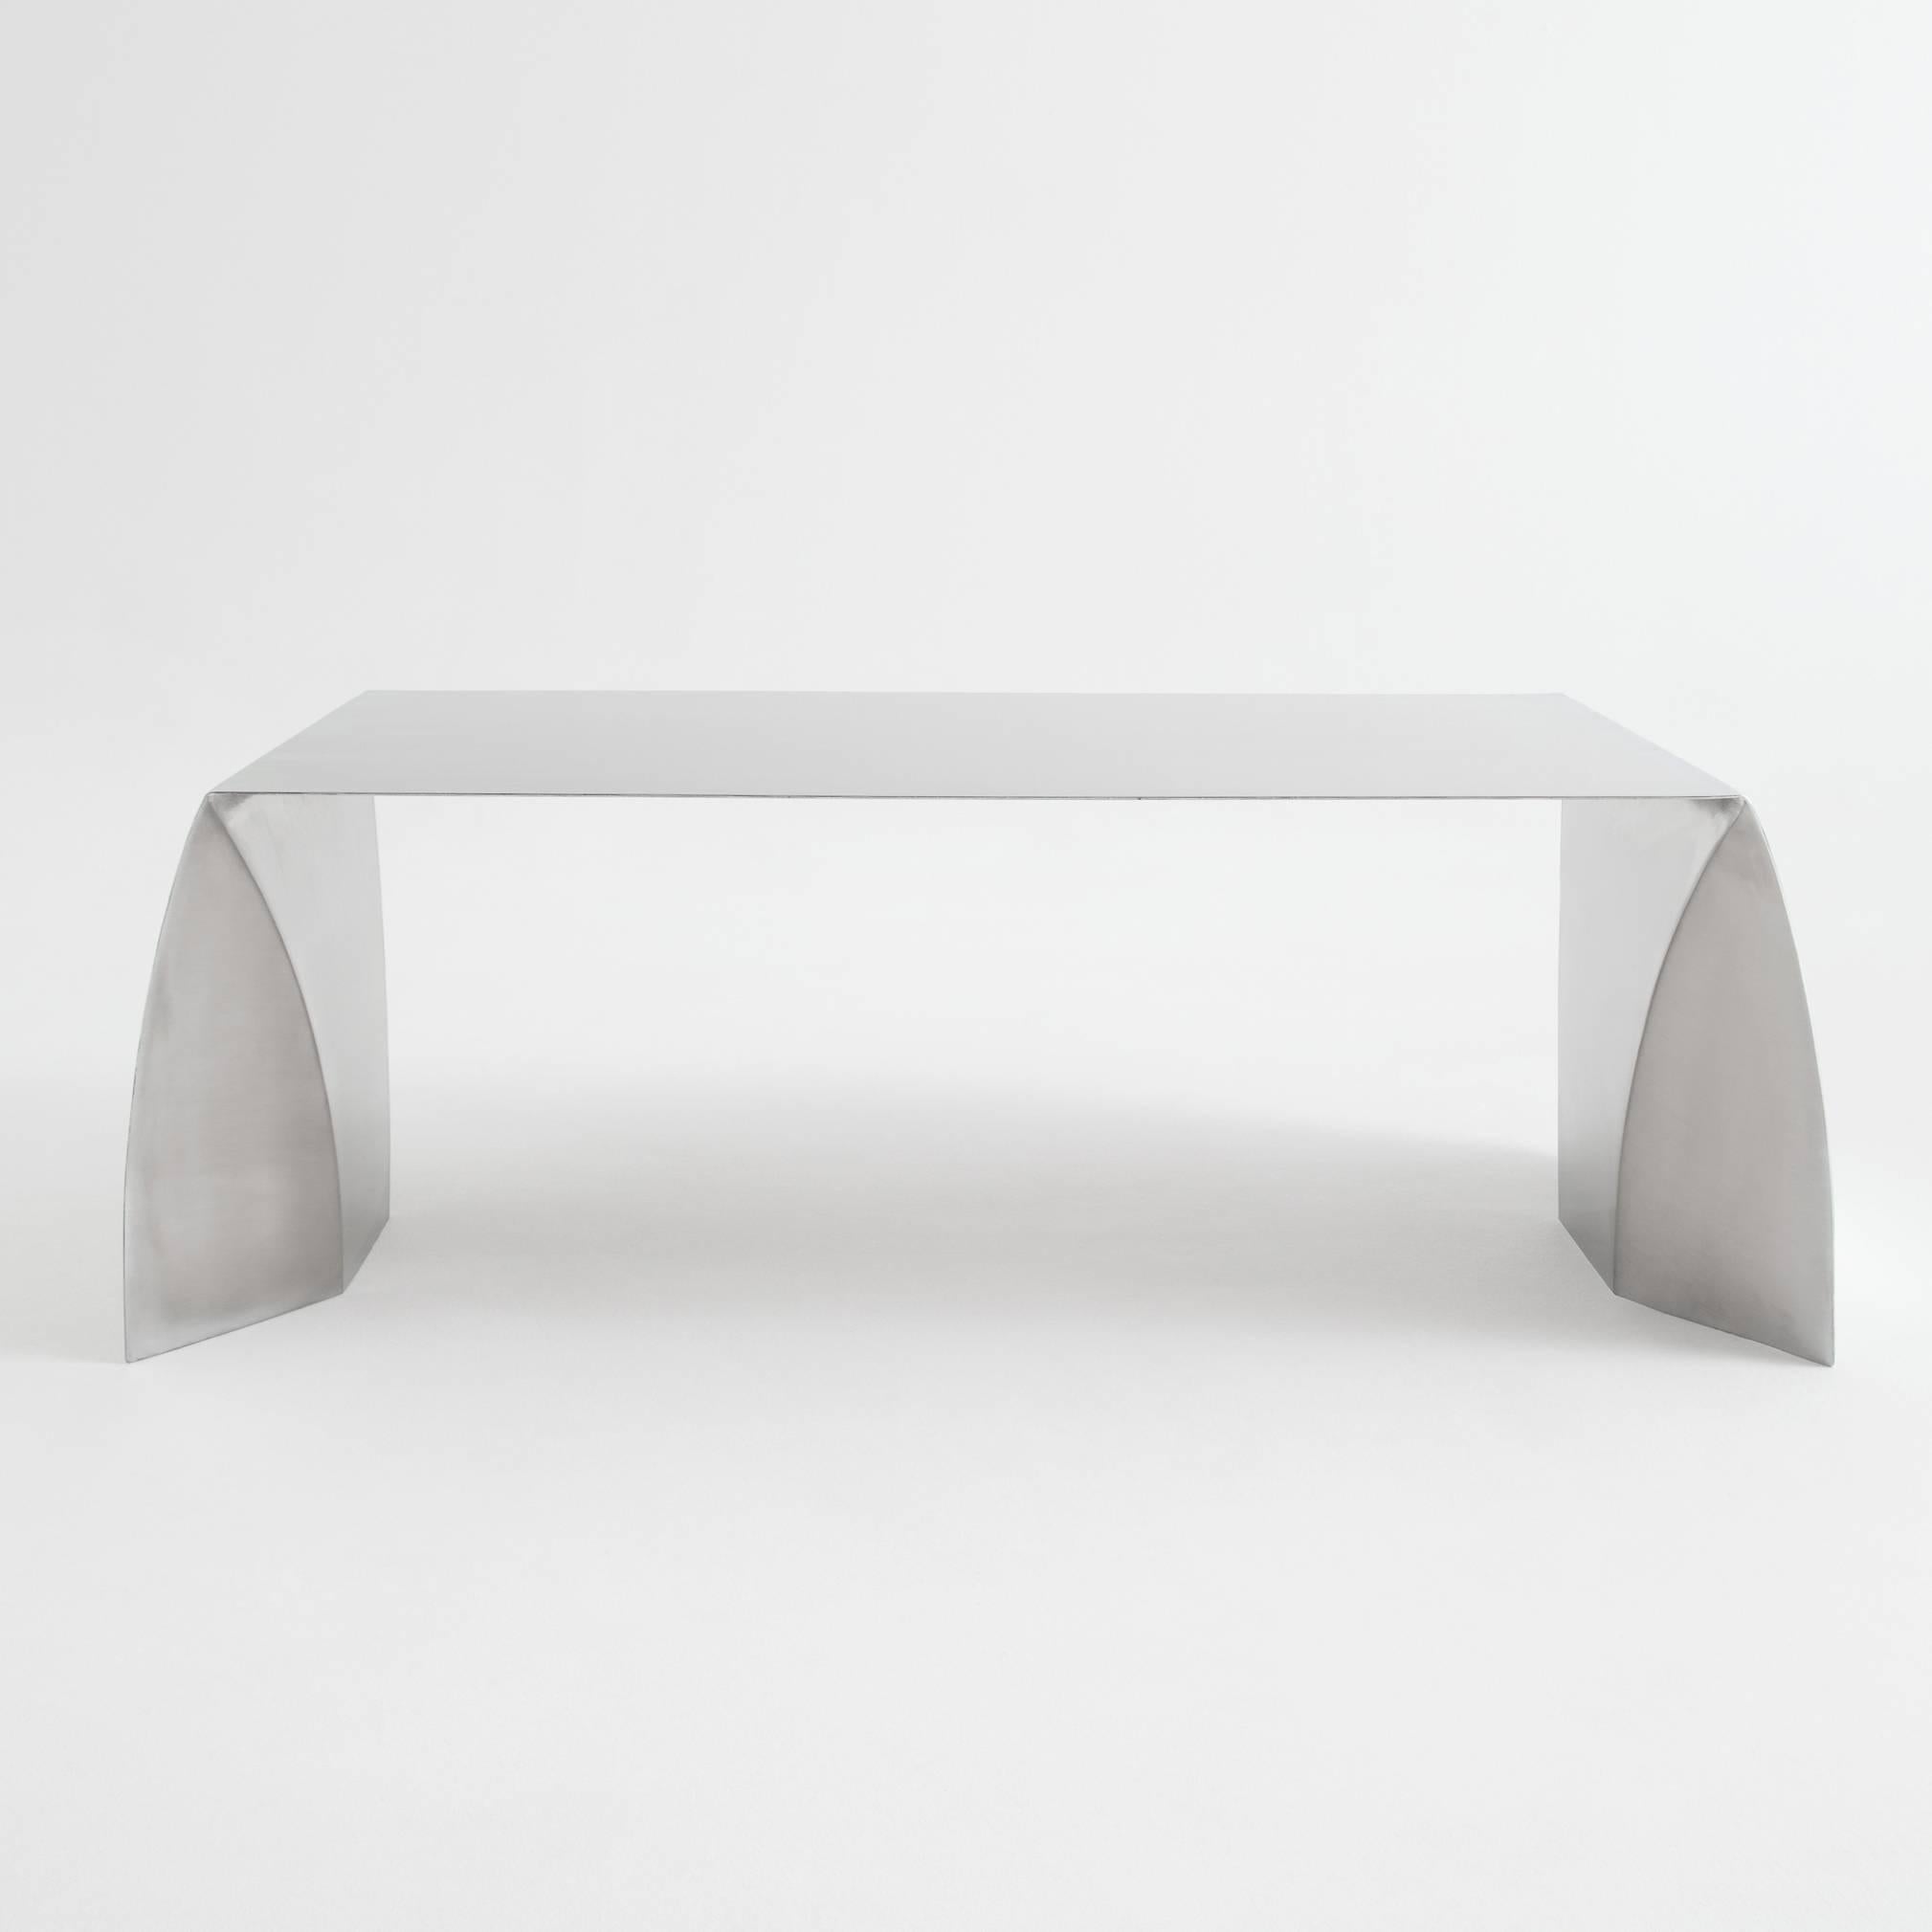 Coffee table designed by Adolfo Abejon manufactured in Barcelona.

